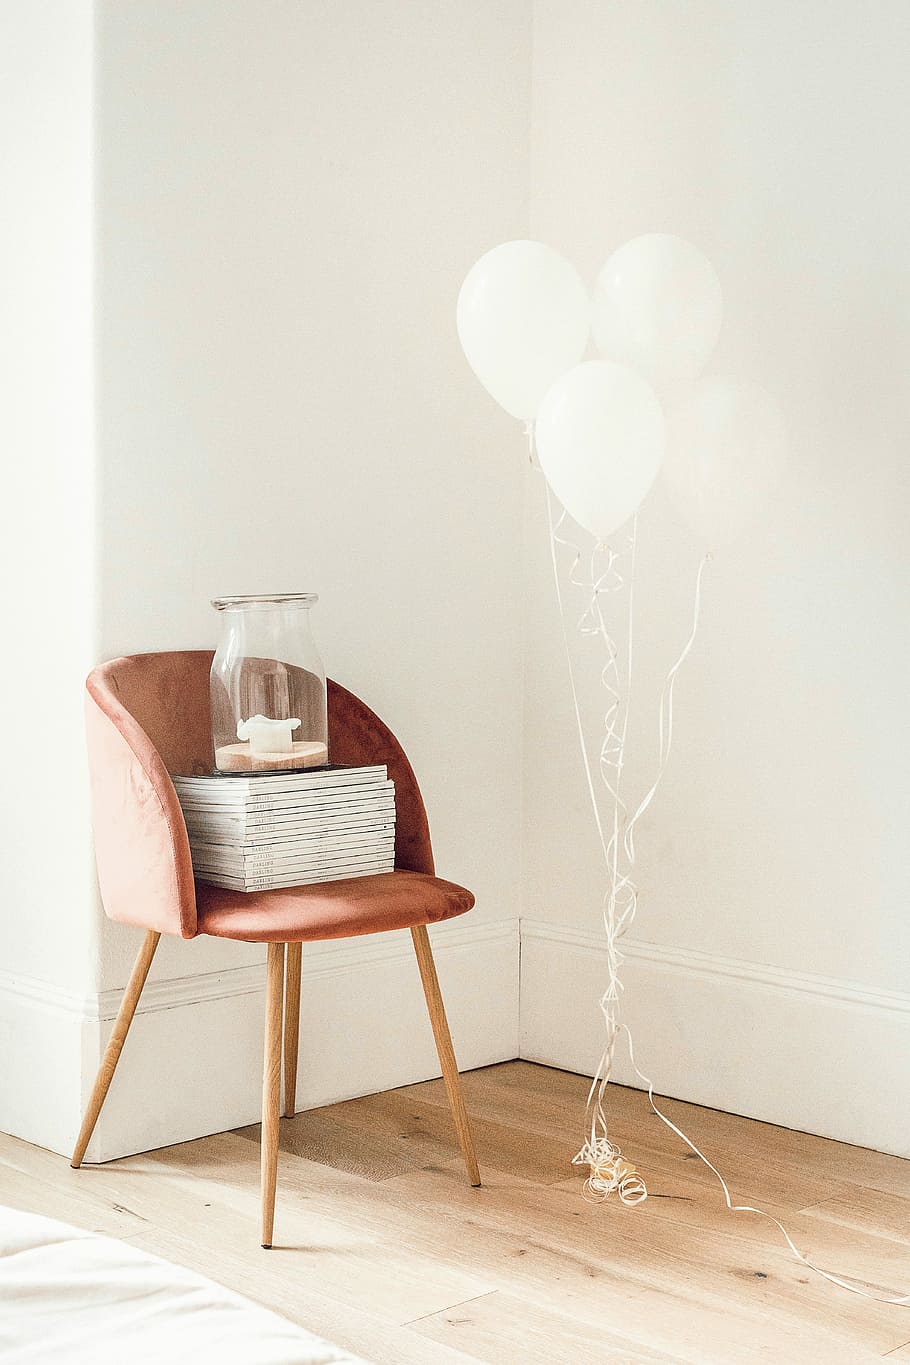 white balloons beside jar on book and chair, clear glass jar on top of chair beside balloons, HD wallpaper